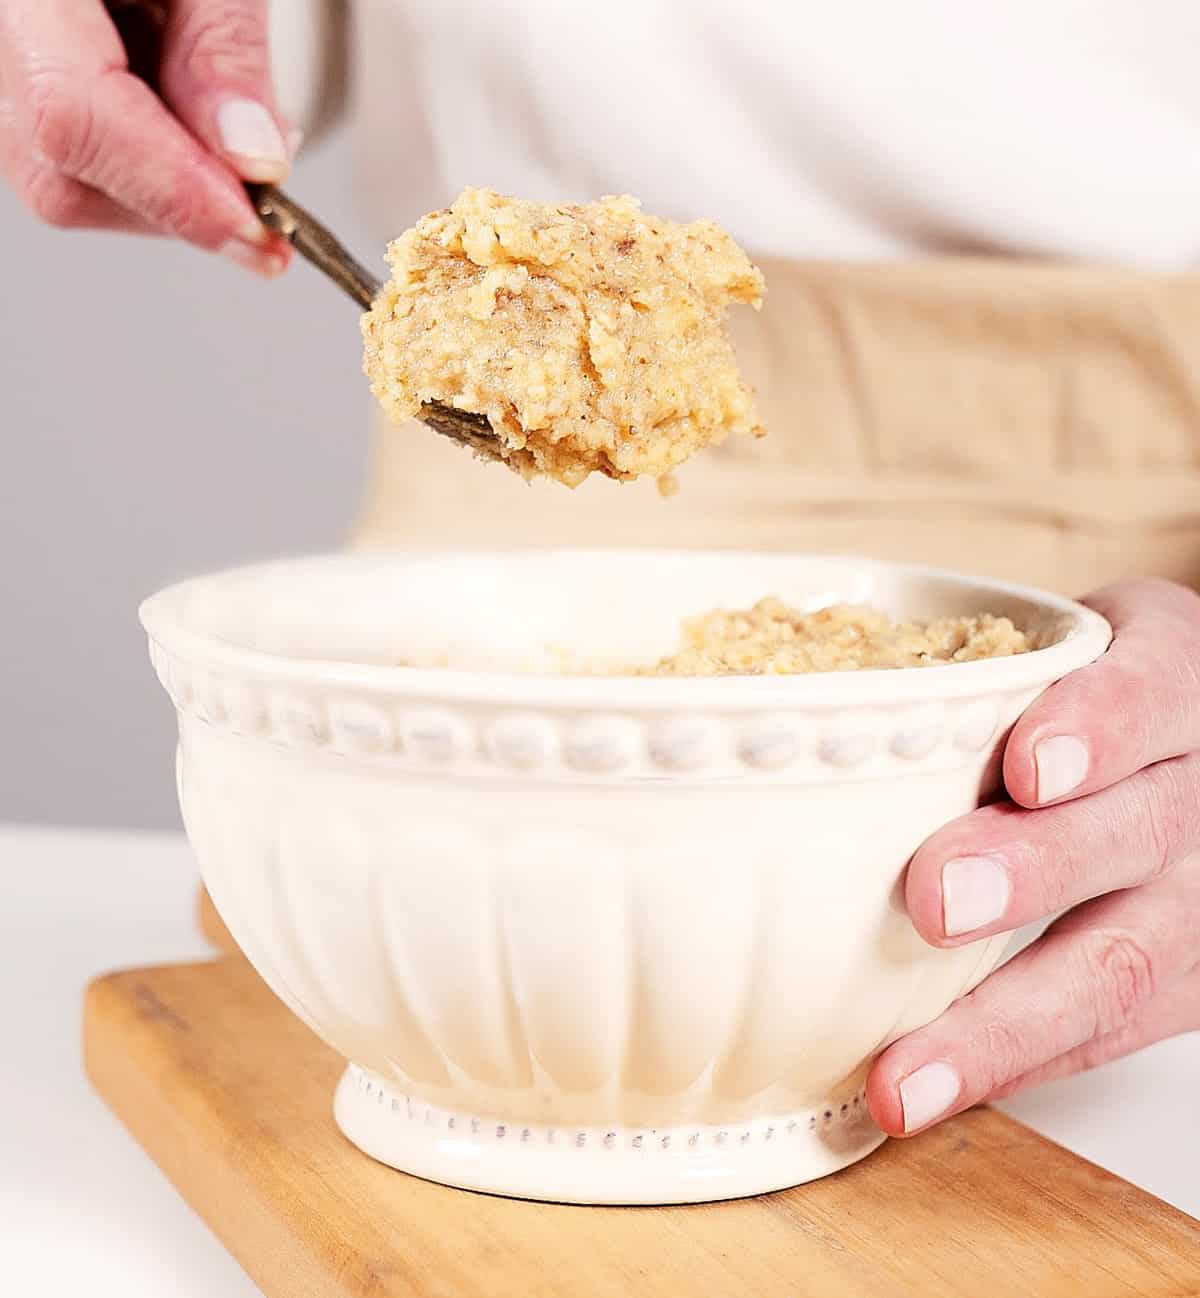 Partial view of person scooping frangipane from a cream colored bowl on a wooden board. 